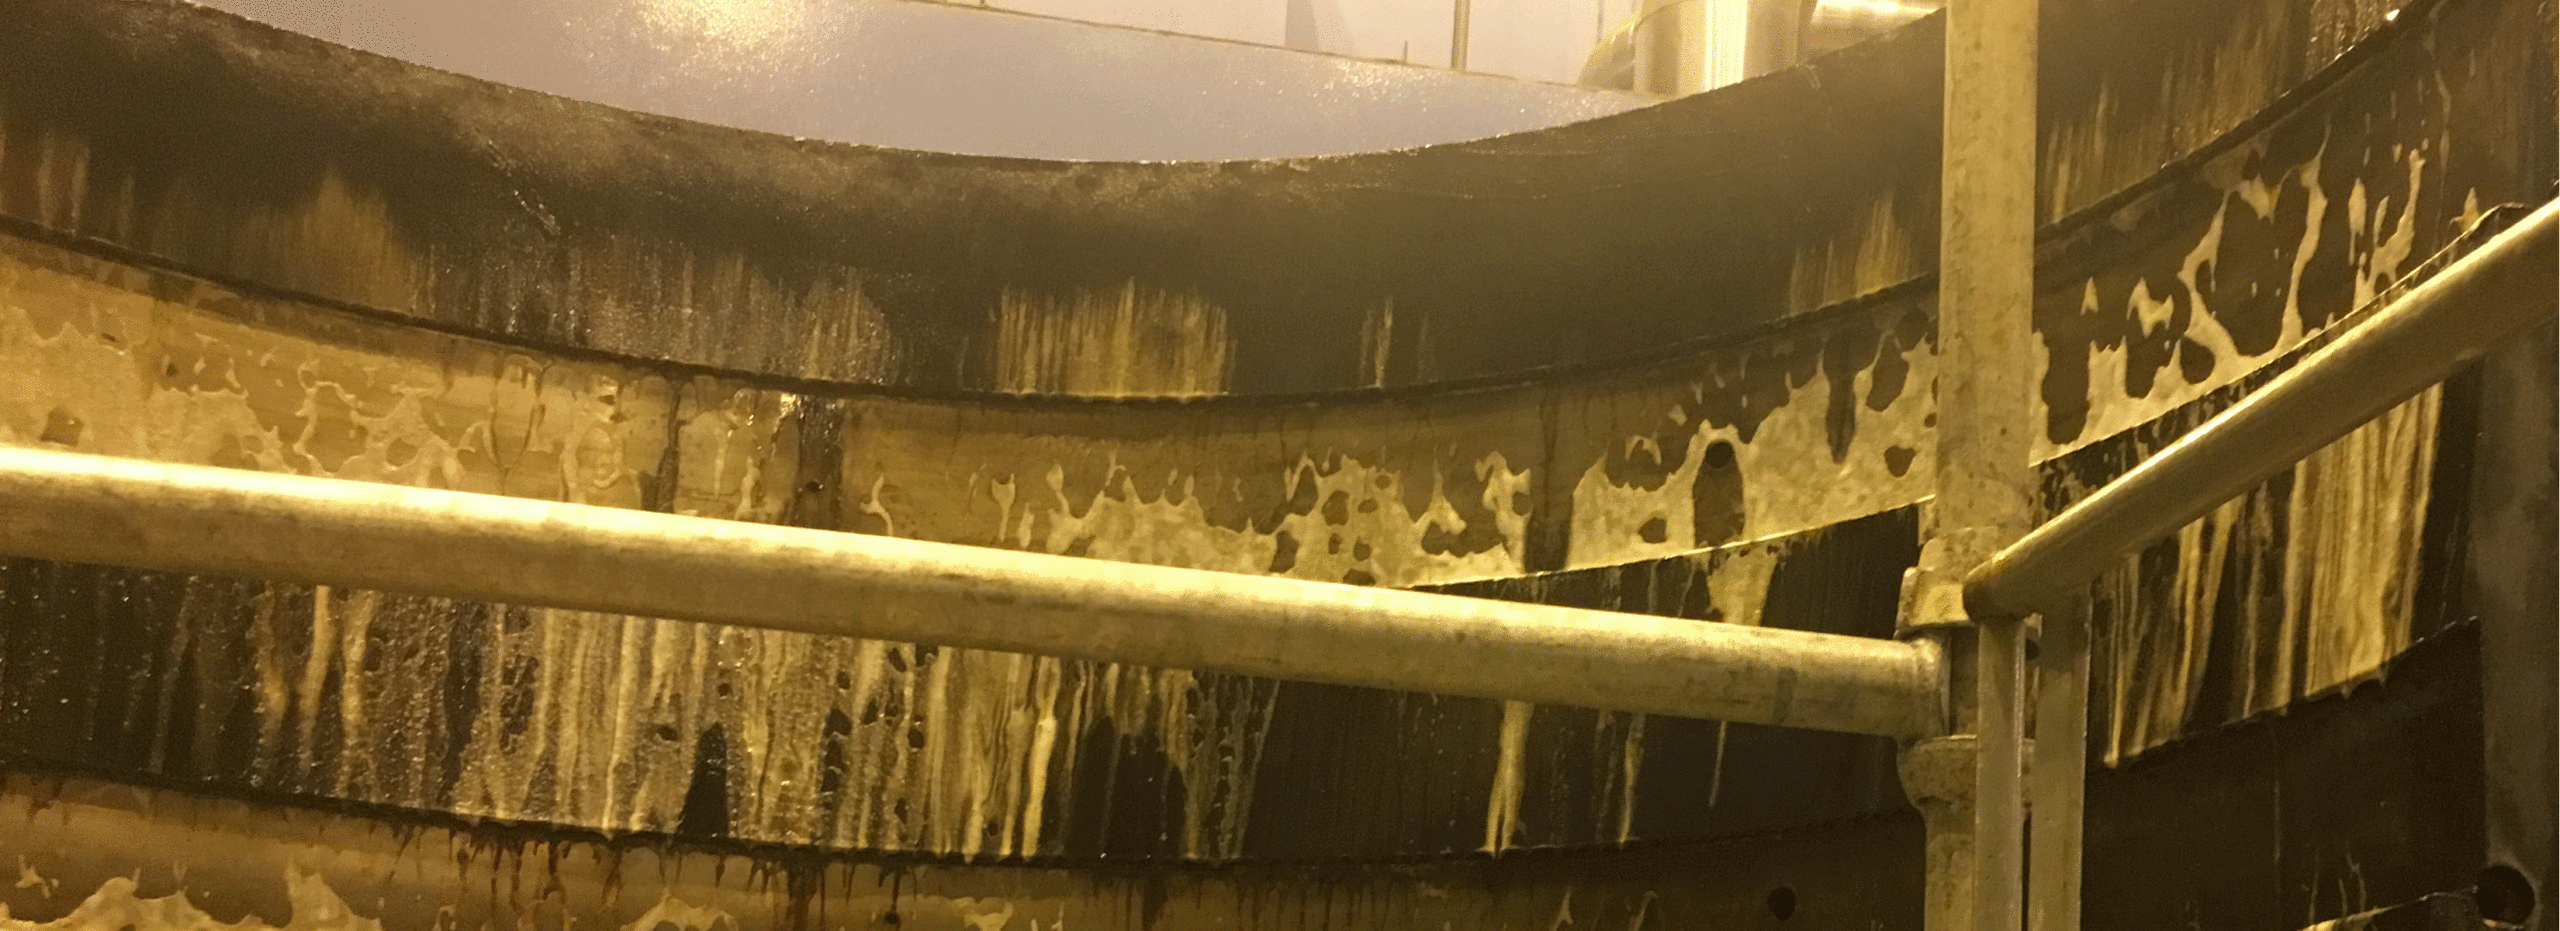 HRSG Unit Turbine - Before Cleaning